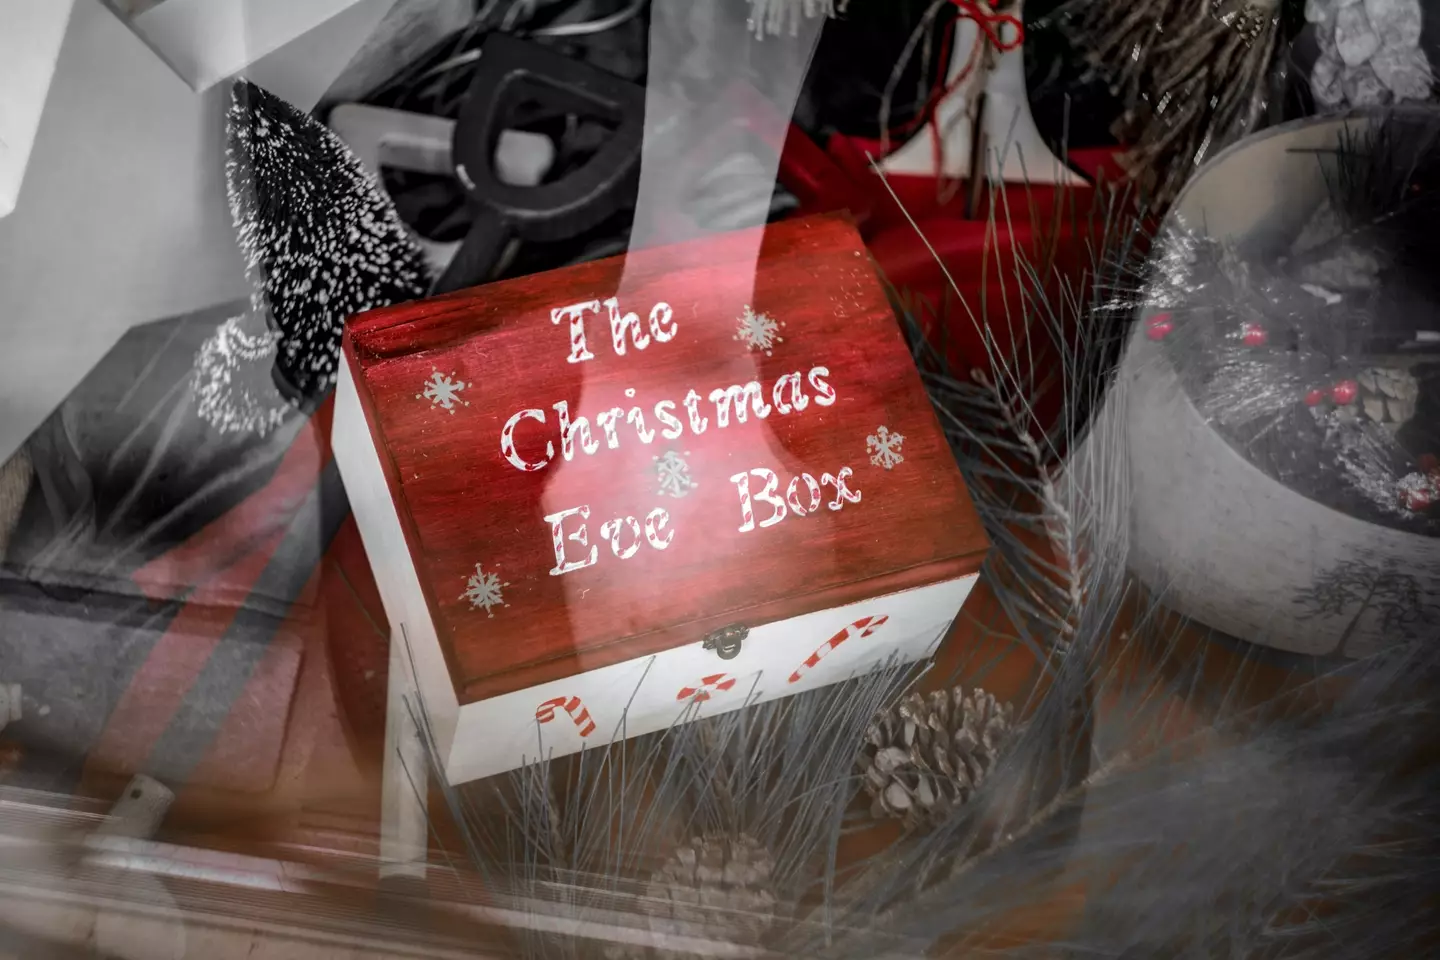 The Christmas Eve box is probably an acceptable loss this year as times are tough.